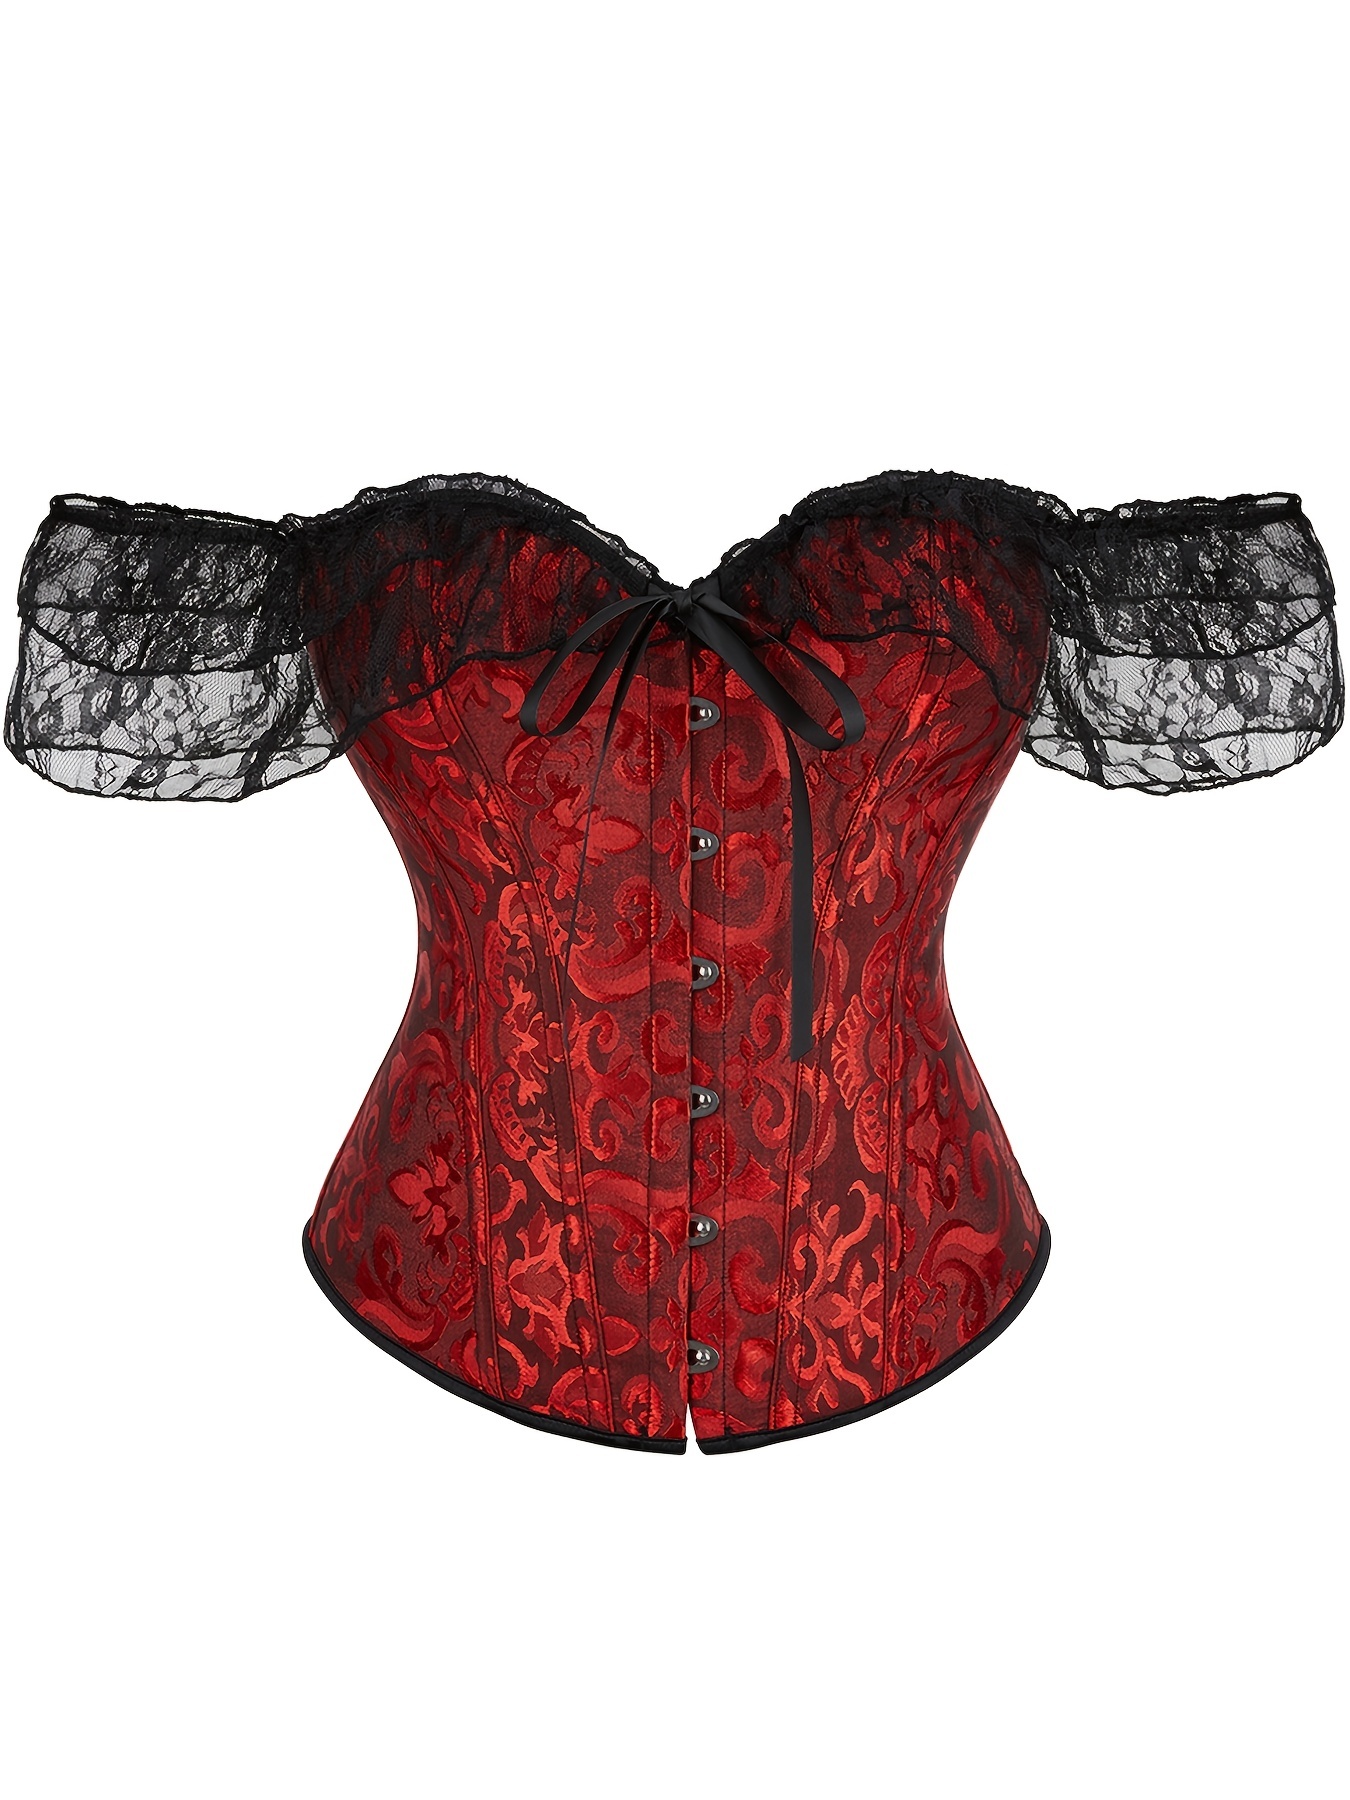  Black And Red Corset For Women - Bustier Shapewear